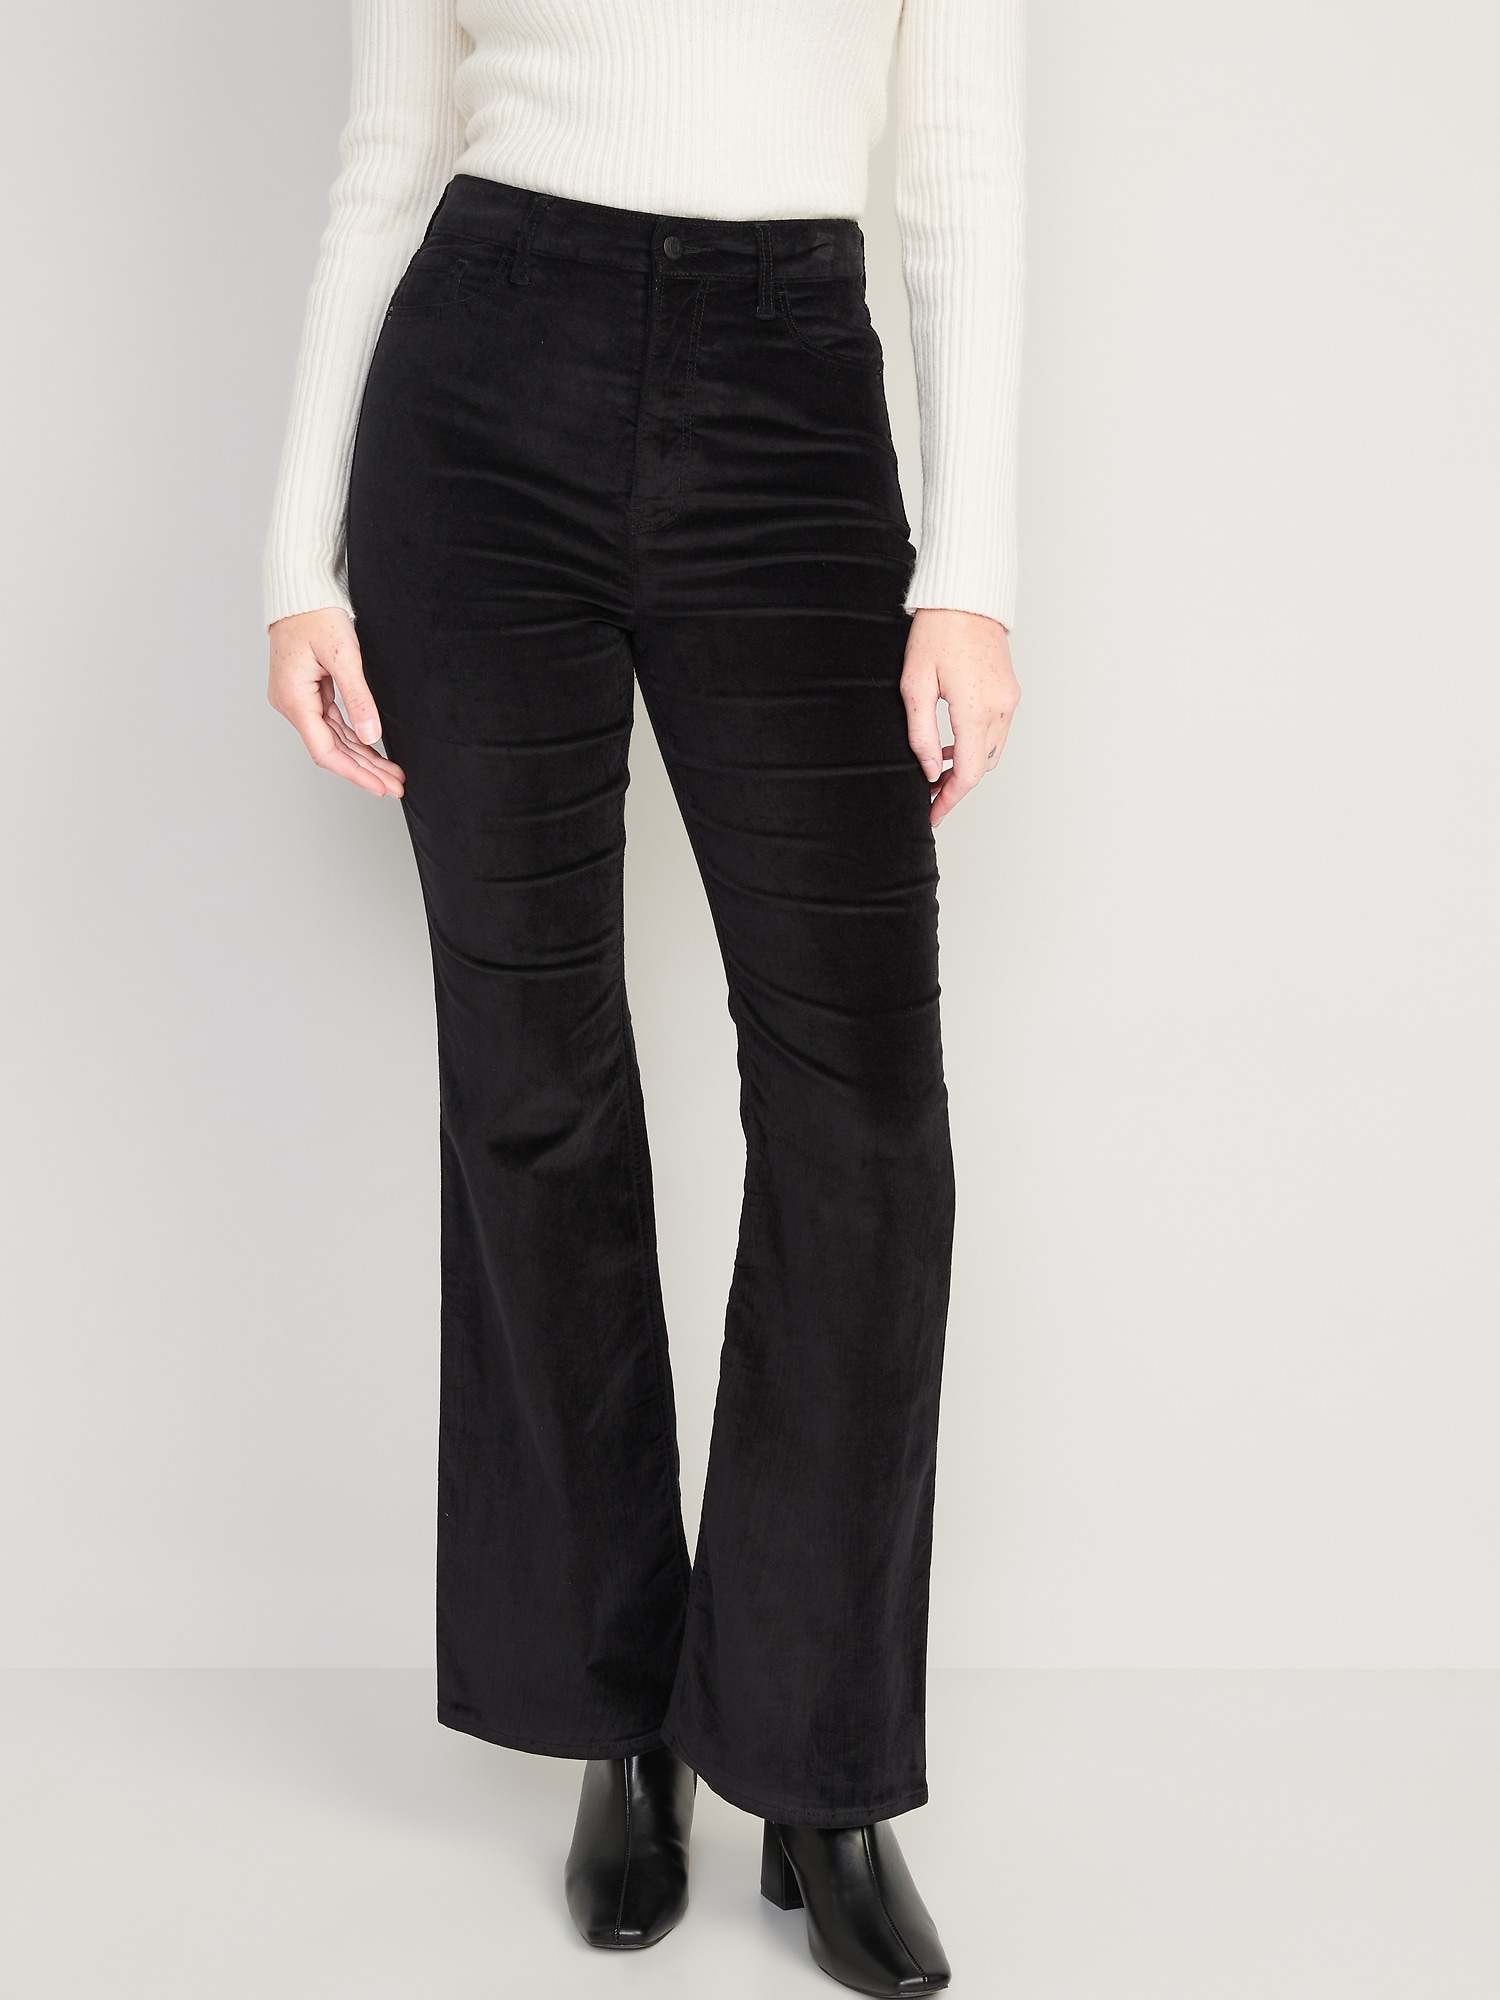 Best Velvet Flare Pants  13 Flare Pants From Old Navy for Every